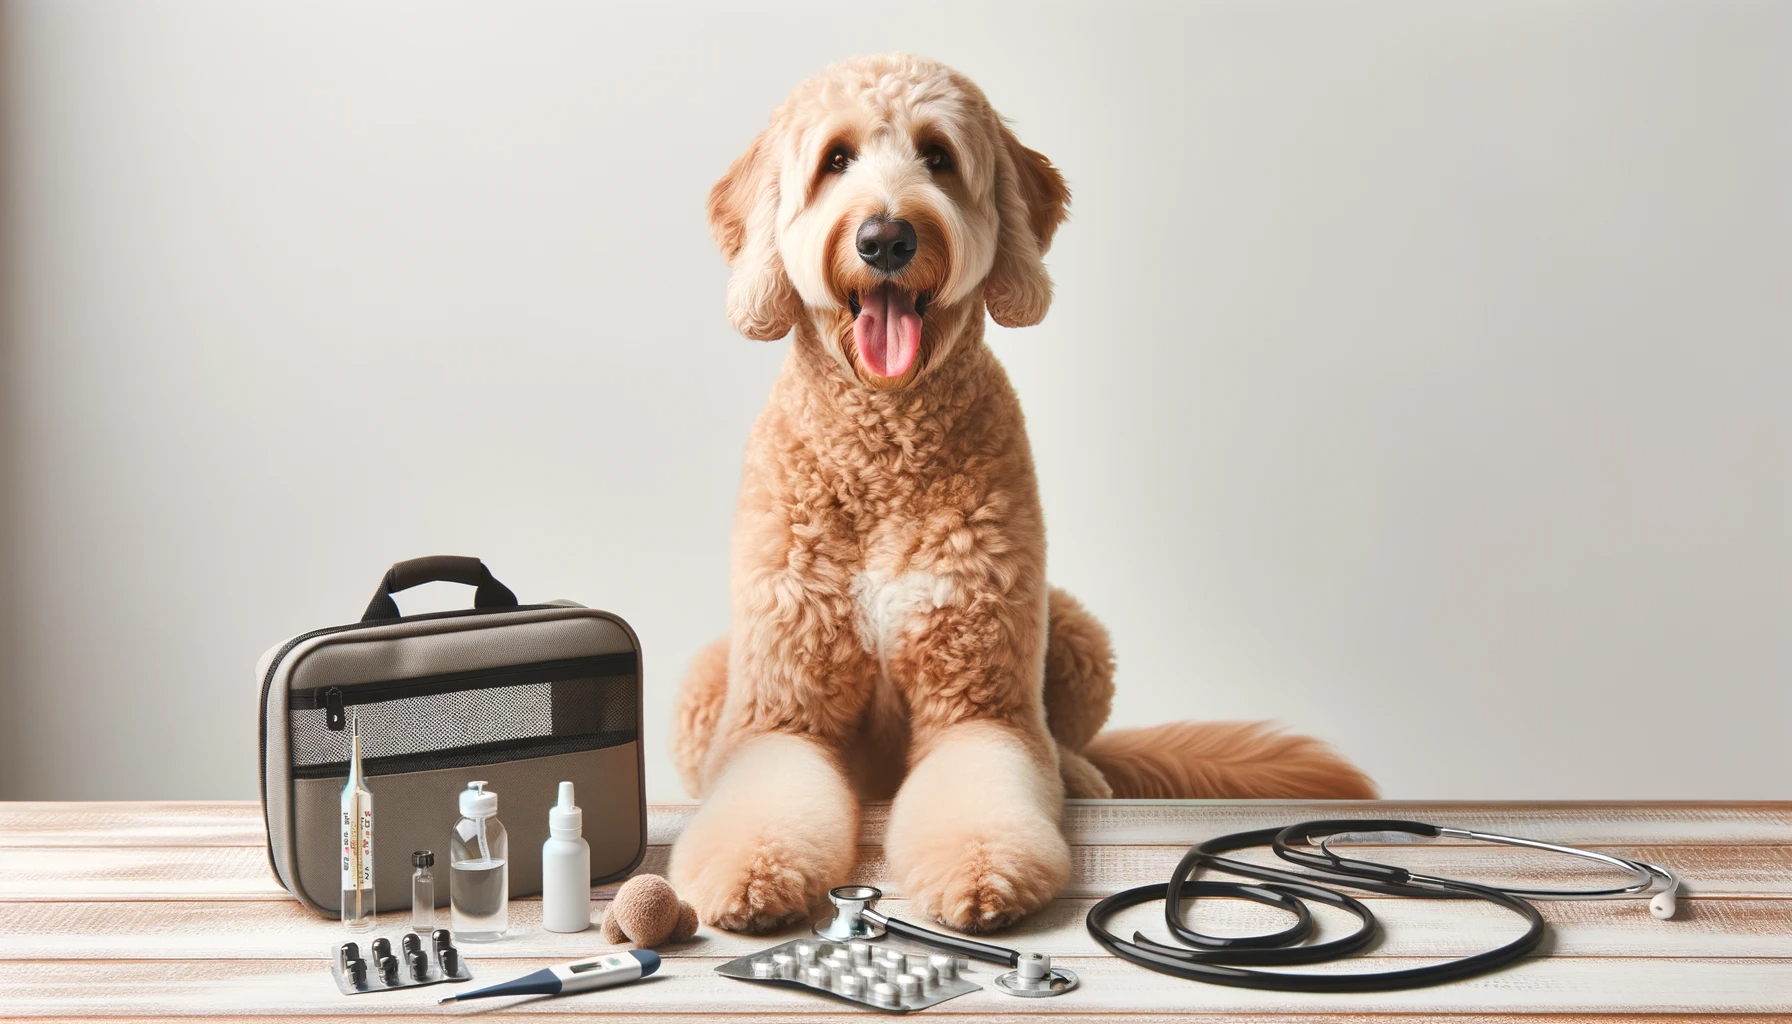 Photo of a joyful Labradoodle sitting calmly next to various vet equipment such as stethoscope, thermometer, and a medical kit. The scene emphasizes the importance of regular health check-ups for maintaining the dog's well-being.